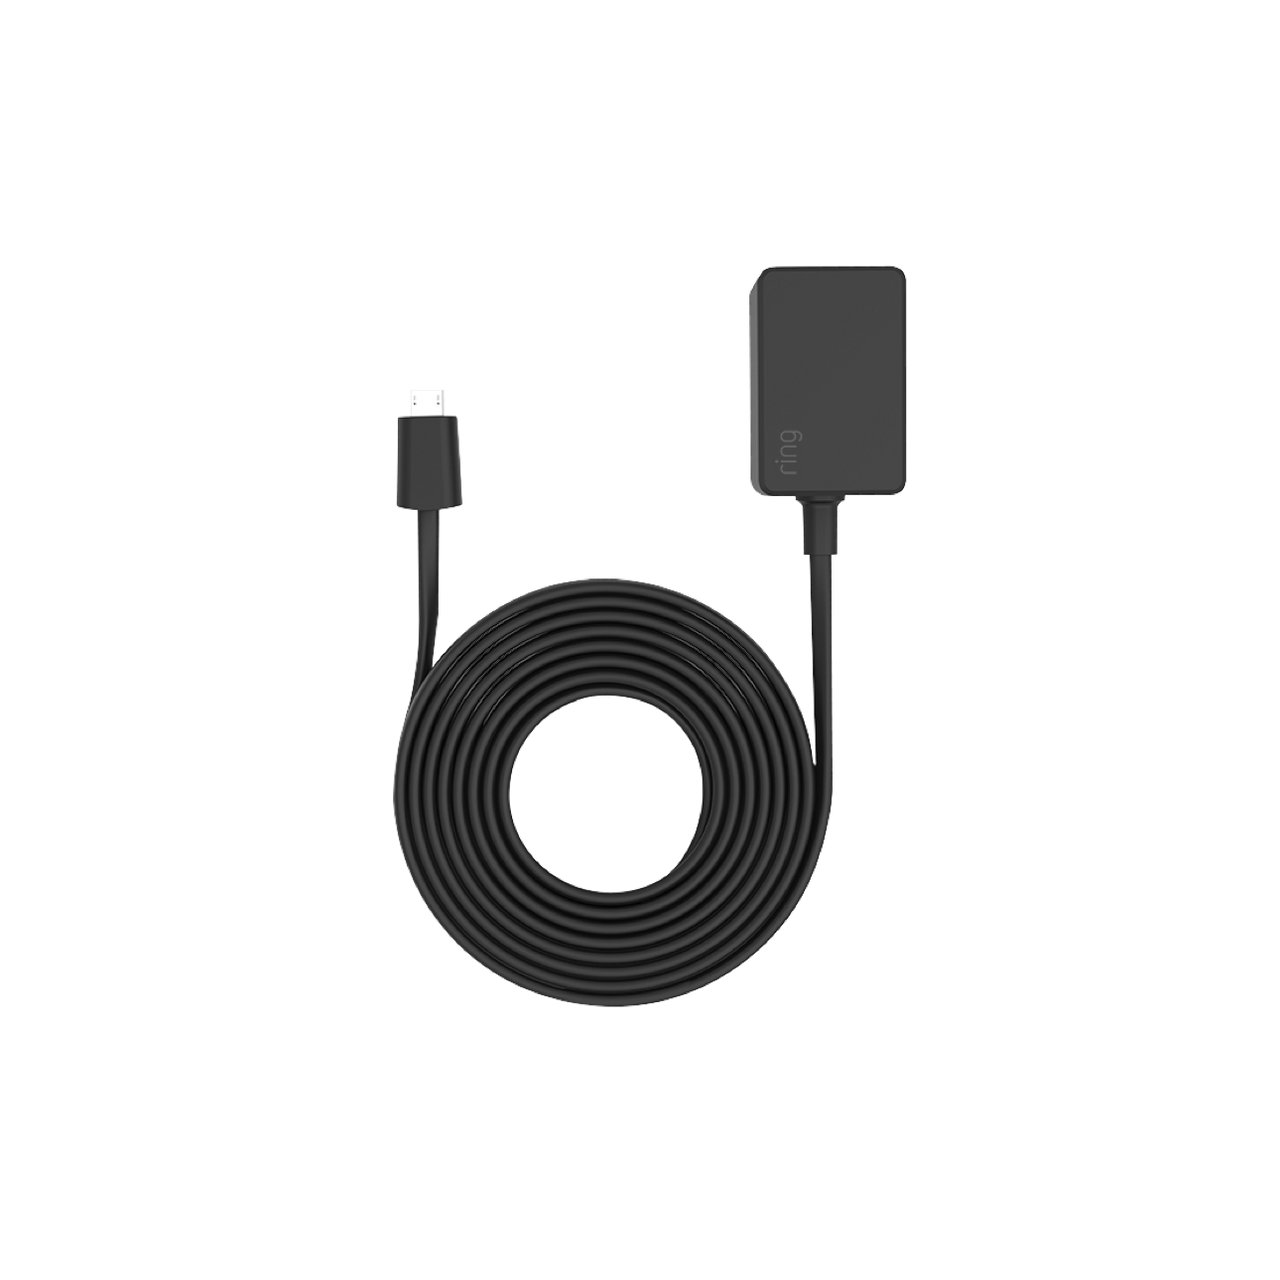 products/IDC_3M_Cable_Black_1290x1290_b752f9ba-167c-4d7c-a51e-f9c238700e1a.png